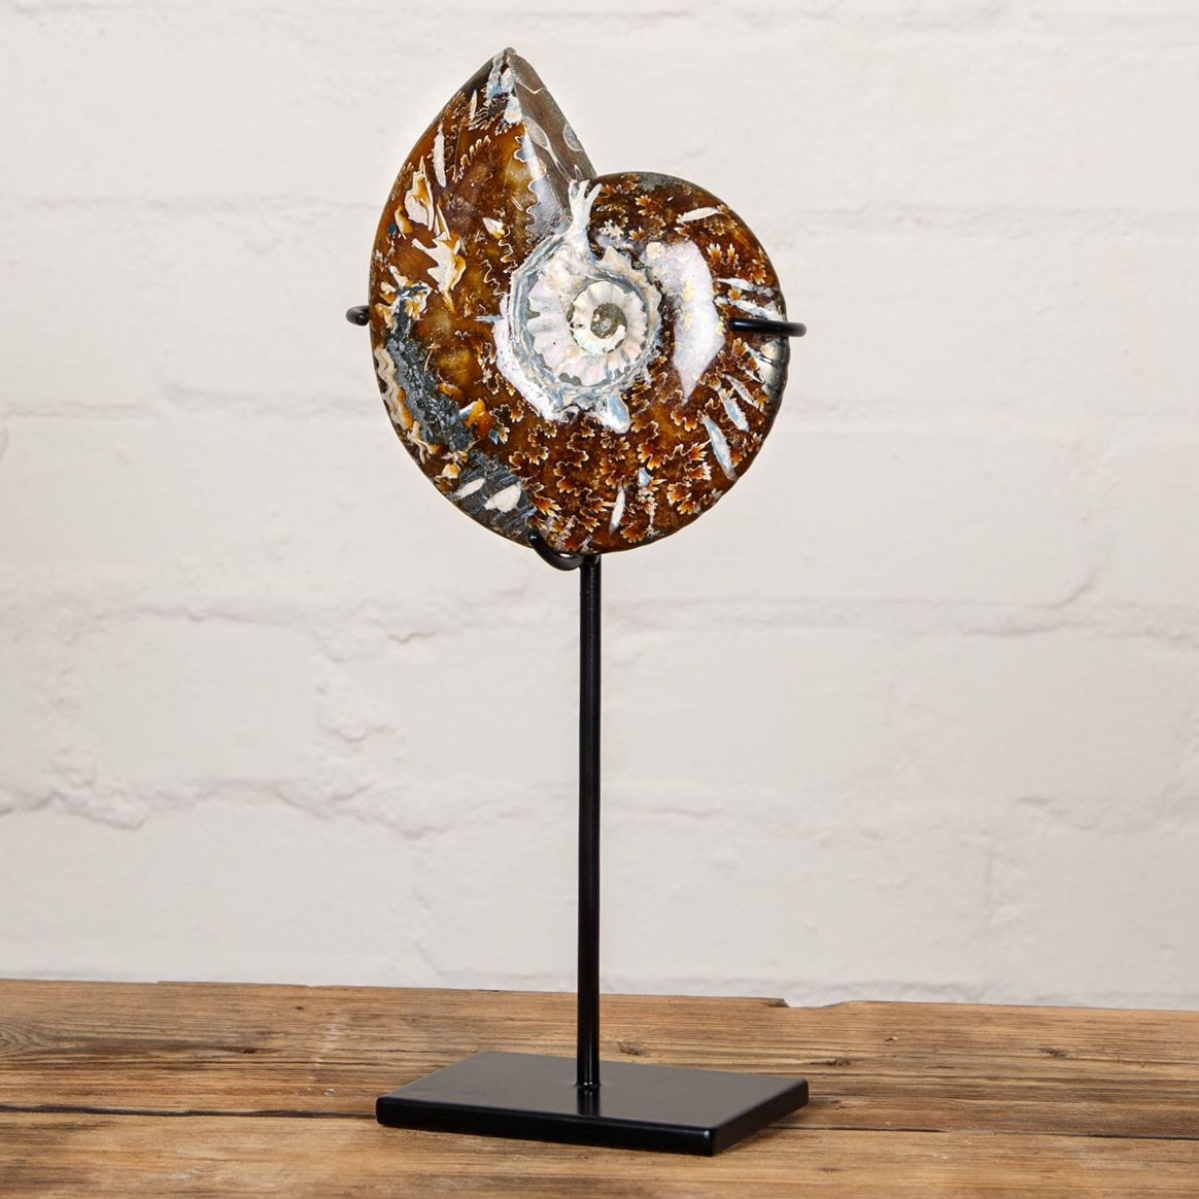 5.5 inch Whole Polished Ammonite Fossil on Stand (Cleoniceras sp)